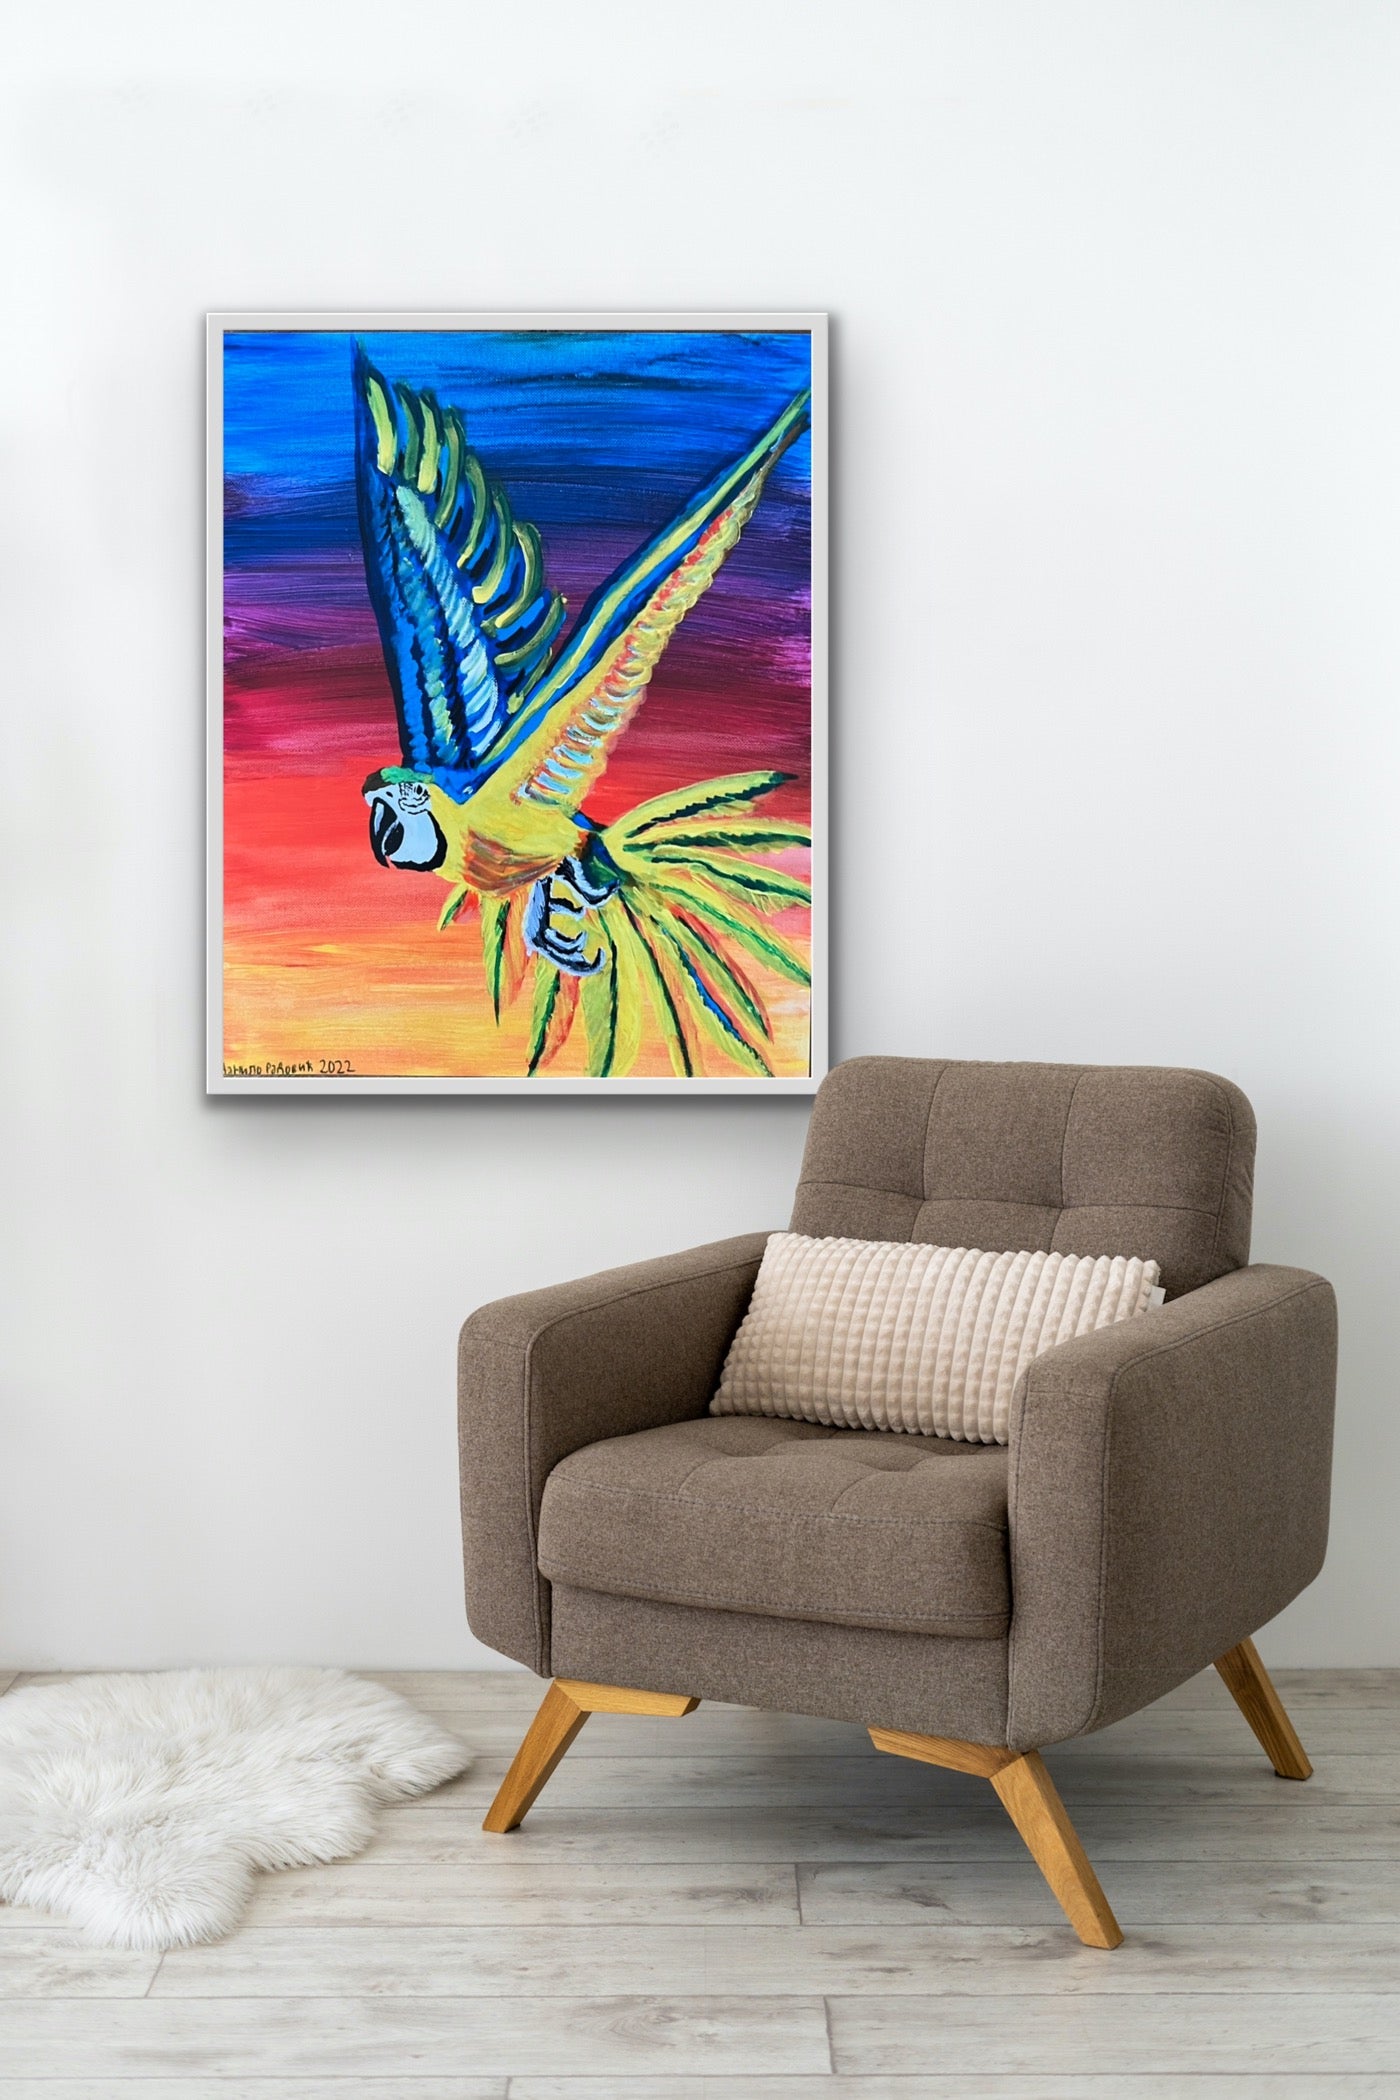 Parrot by D. Radovic - guest artist